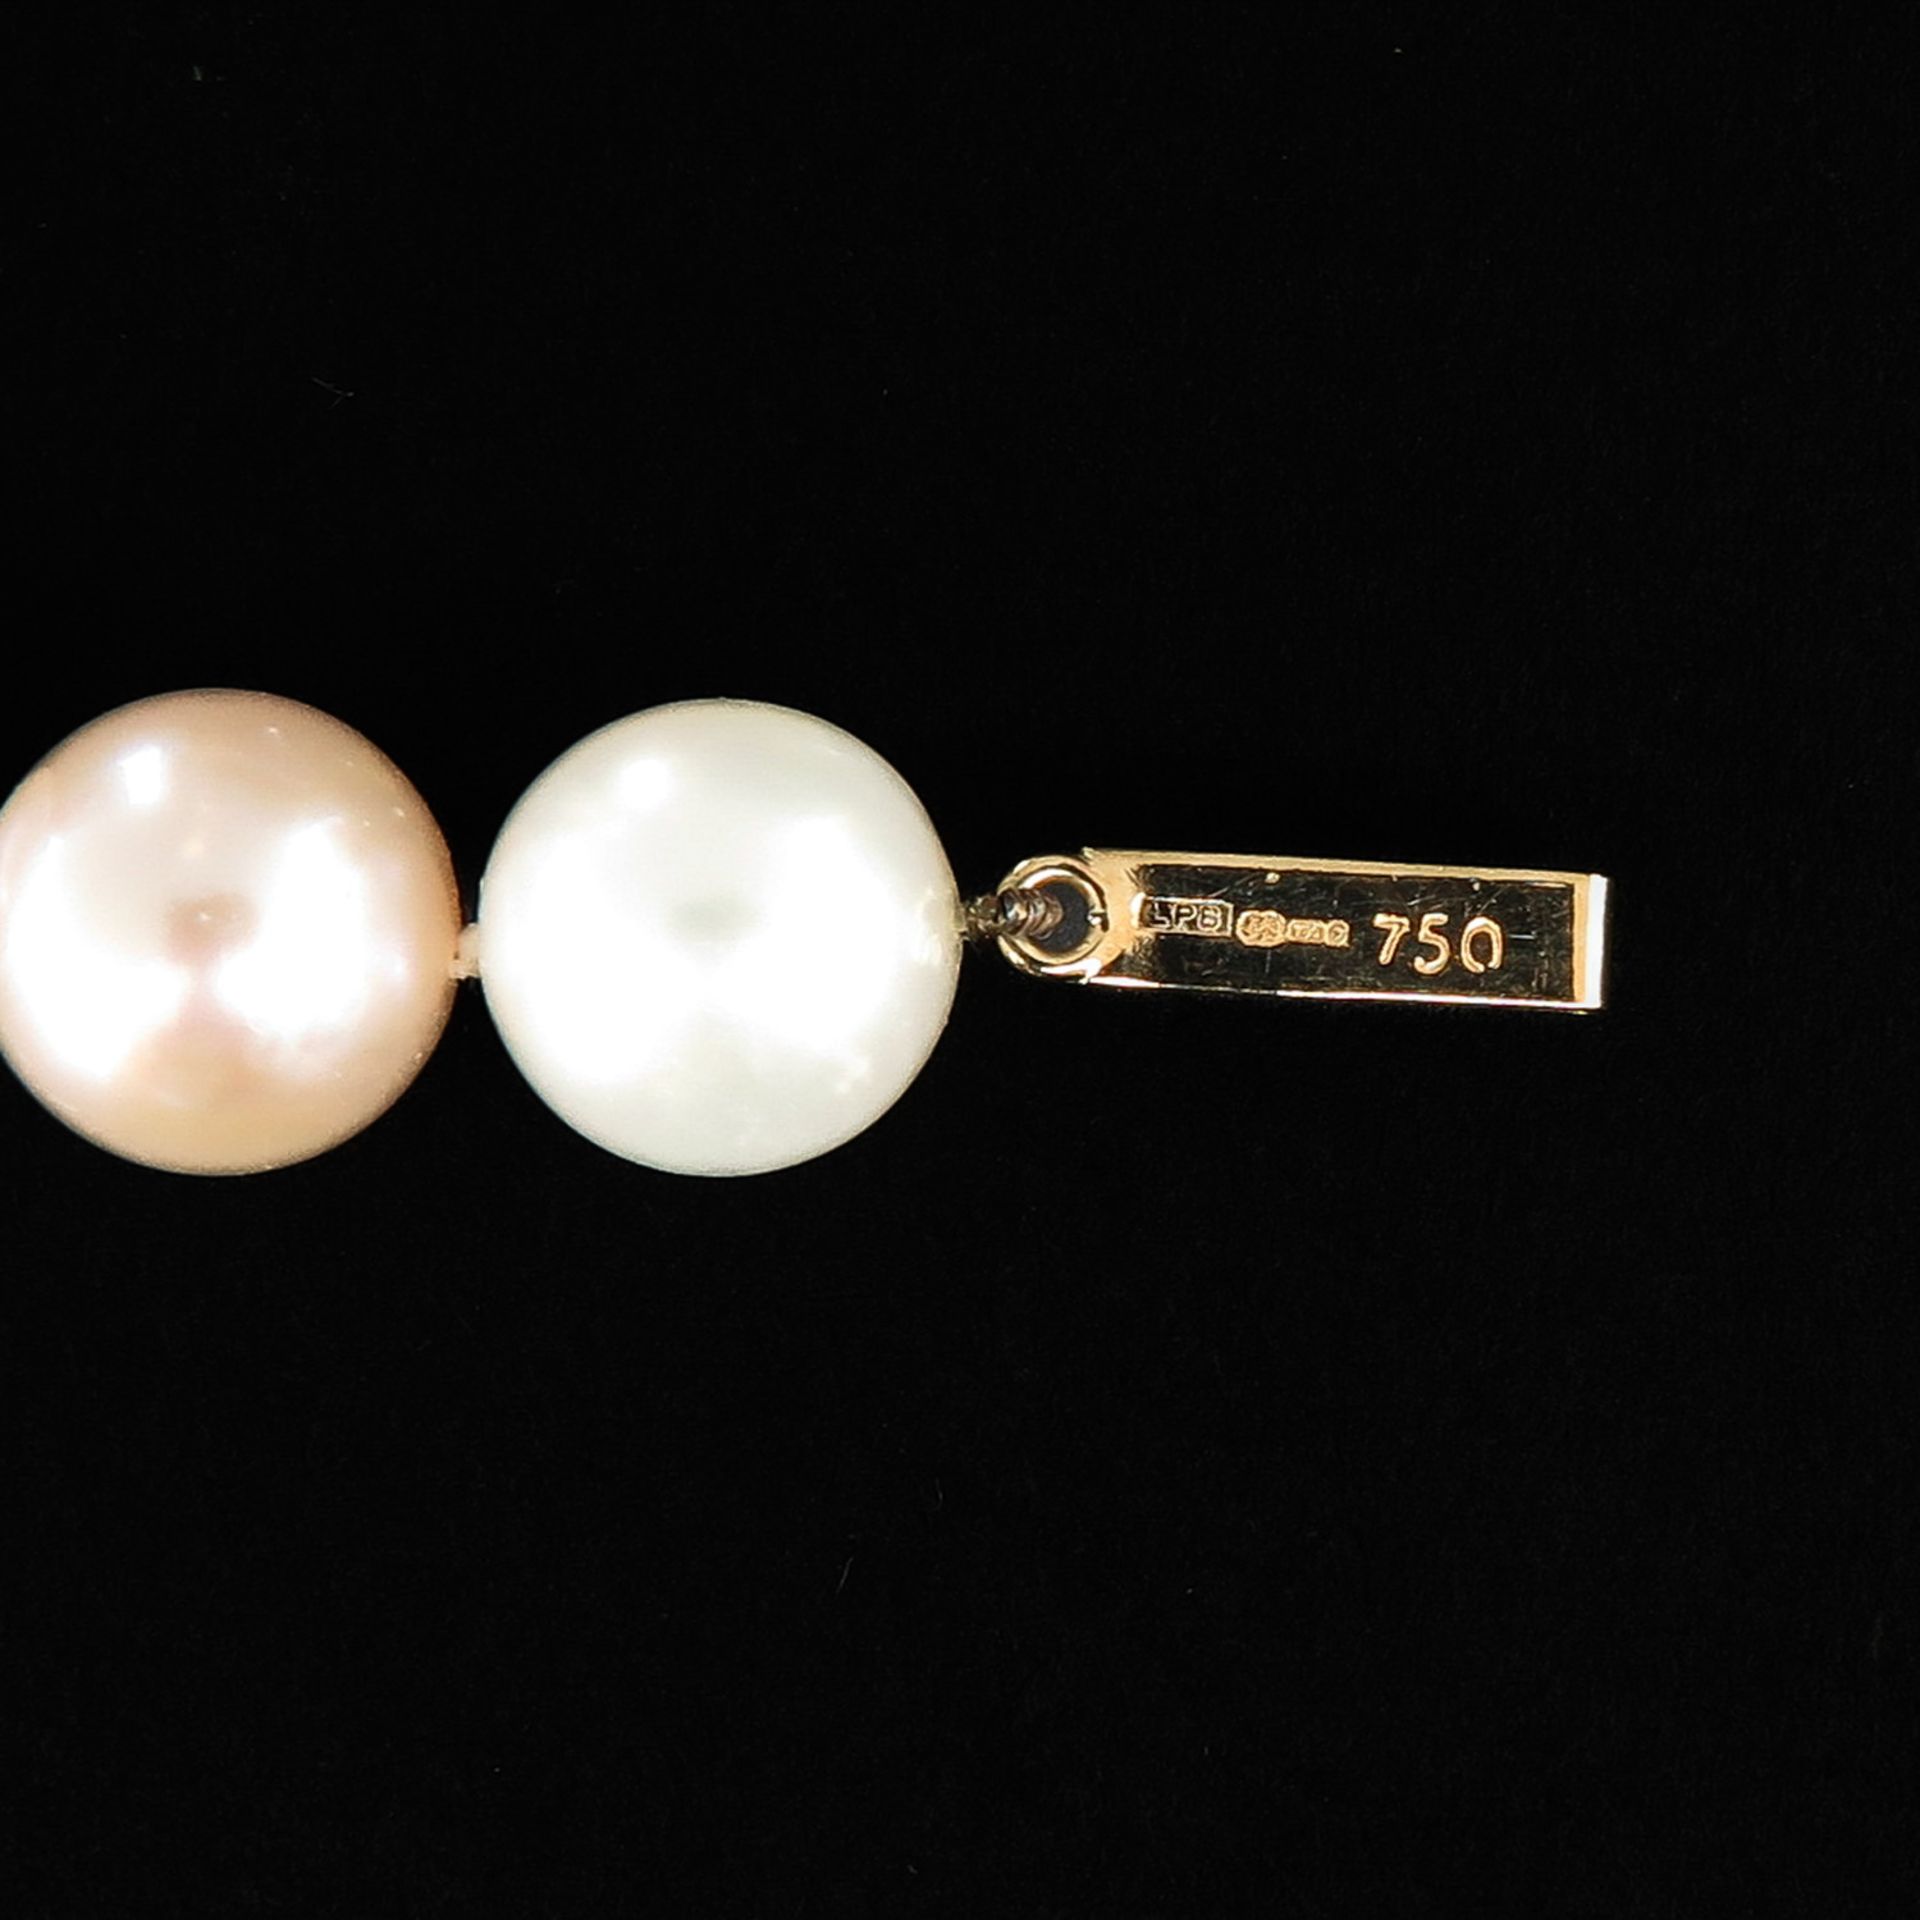 A Single Strand Pearl Necklace - Image 5 of 6